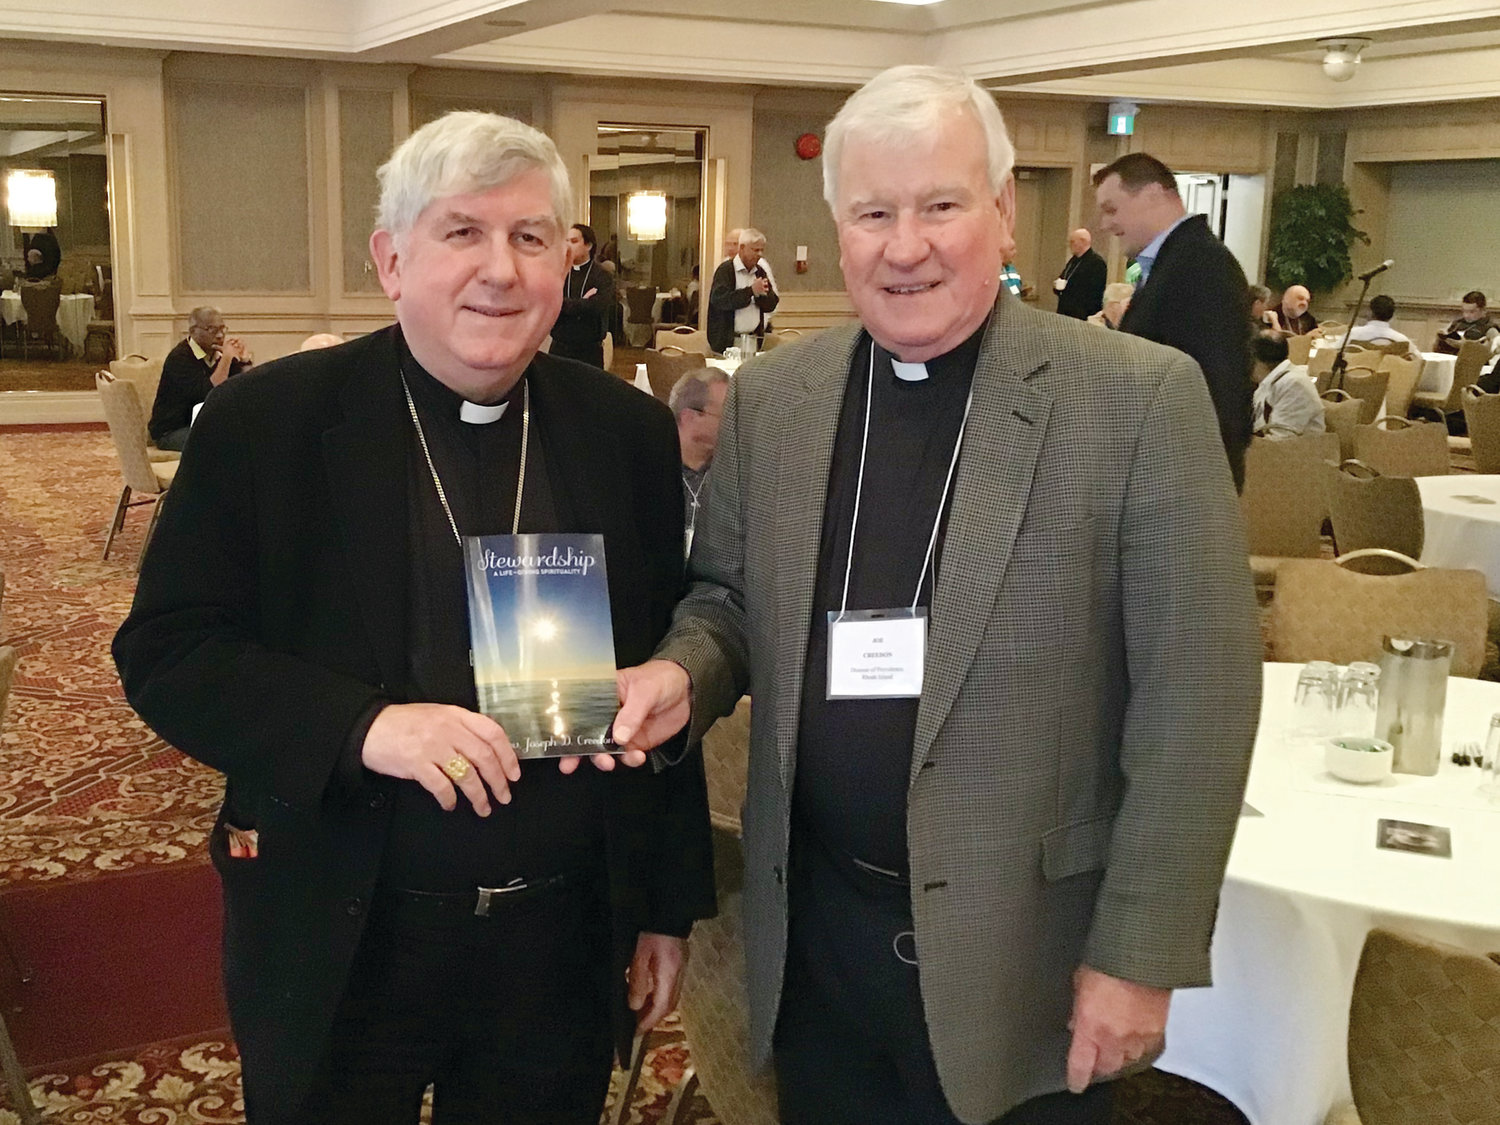 Father Joseph Creedon, right, presents a copy of his book, “Stewardship: A Life-Giving Spirituality” to Cardinal Thomas Collins, the archbishop of Toronto. Father Creedon was in Toronto last fall to speak to the priests of the archdiocese about the spirituality of Stewardship.